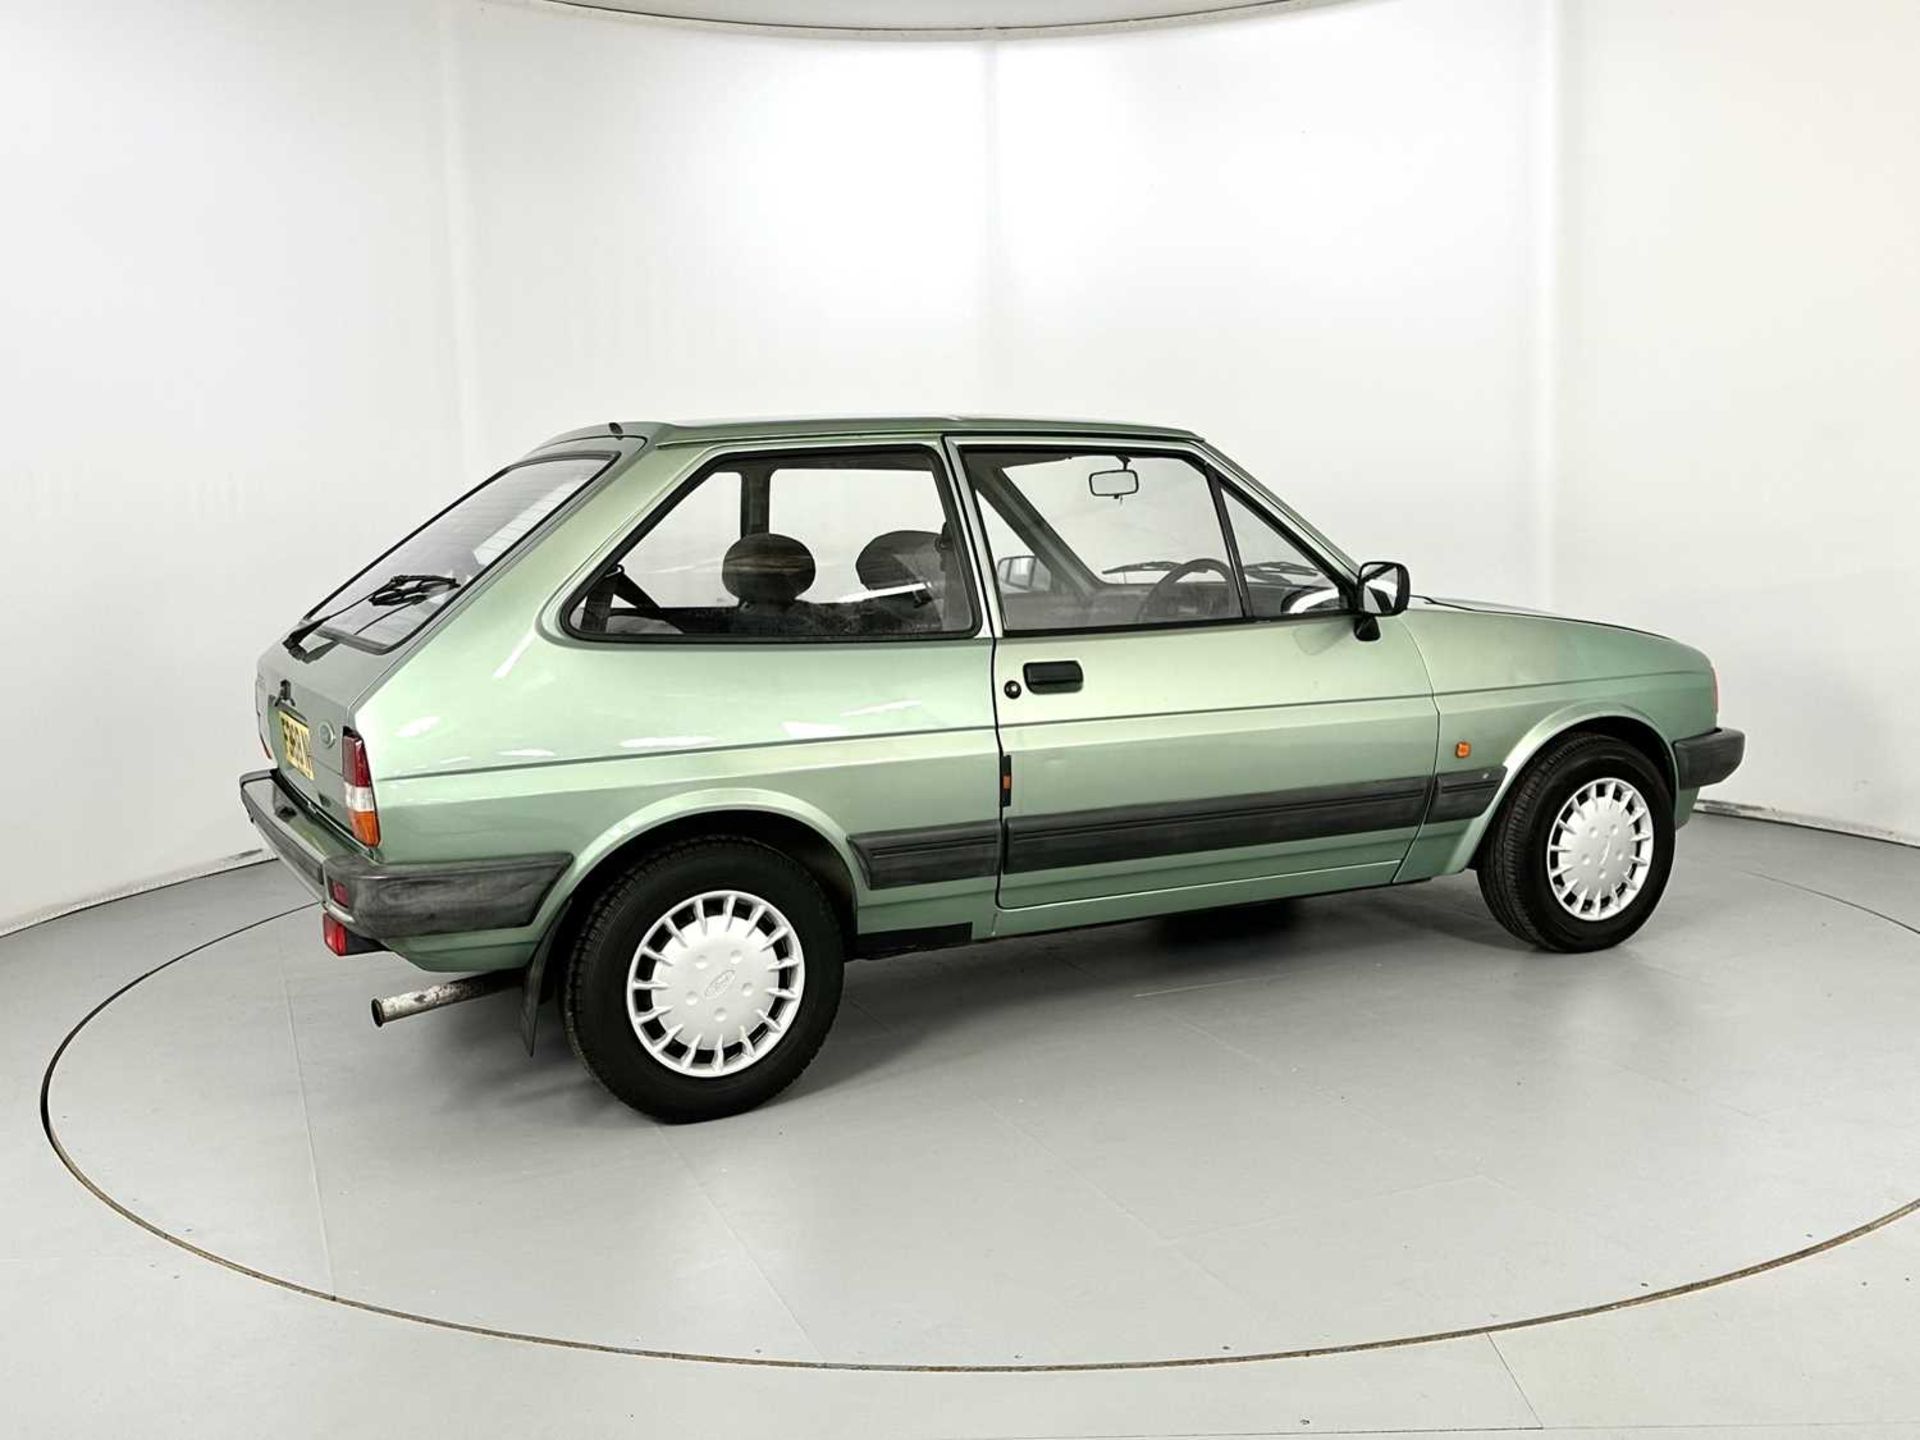 1988 Ford Fiesta - Image 10 of 30